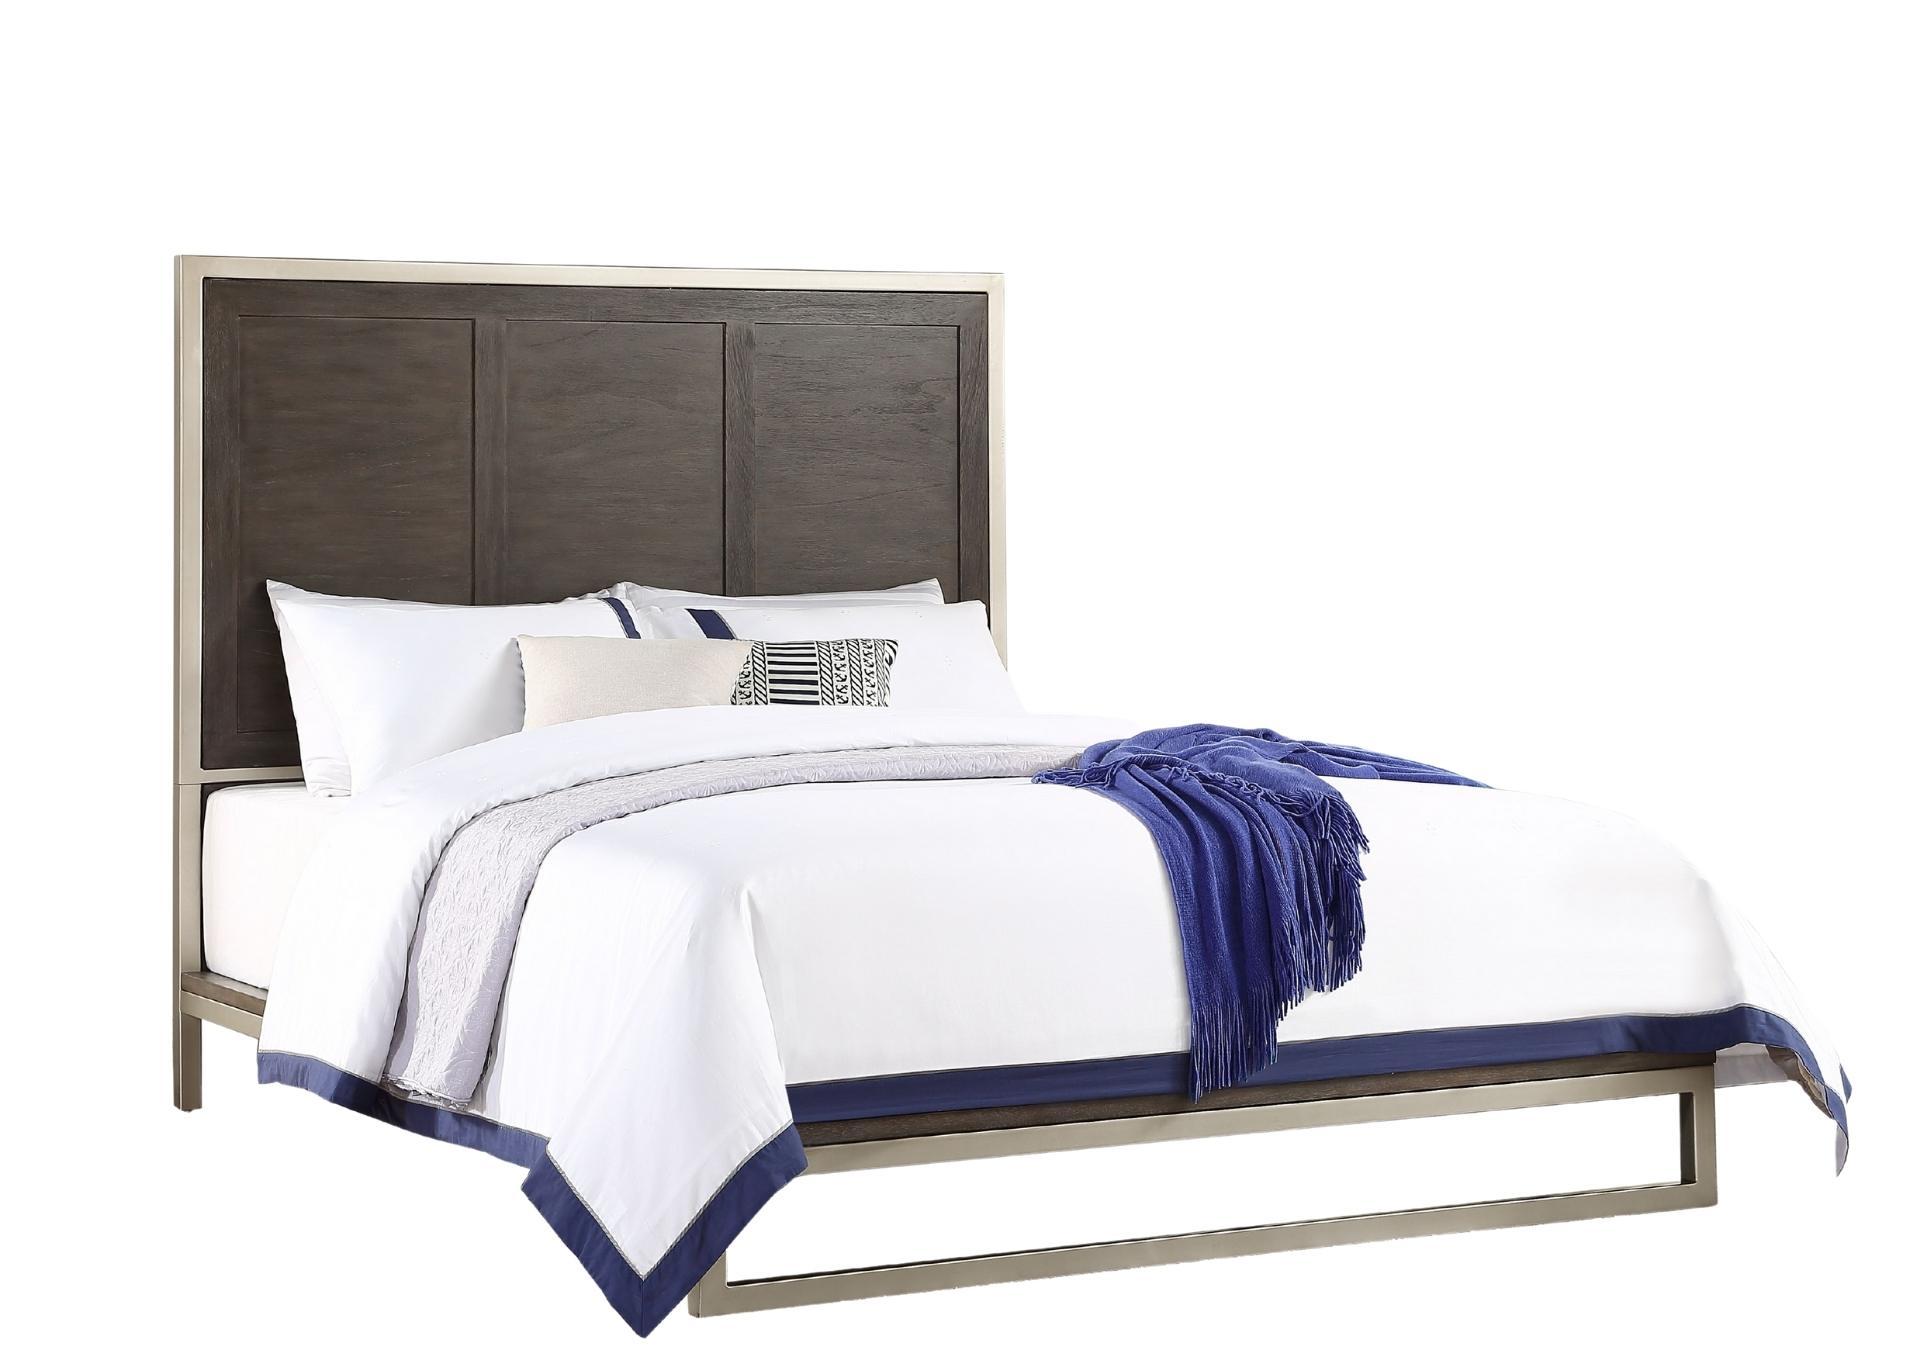 BROOMFIELD KING BED,STEVE SILVER COMPANY